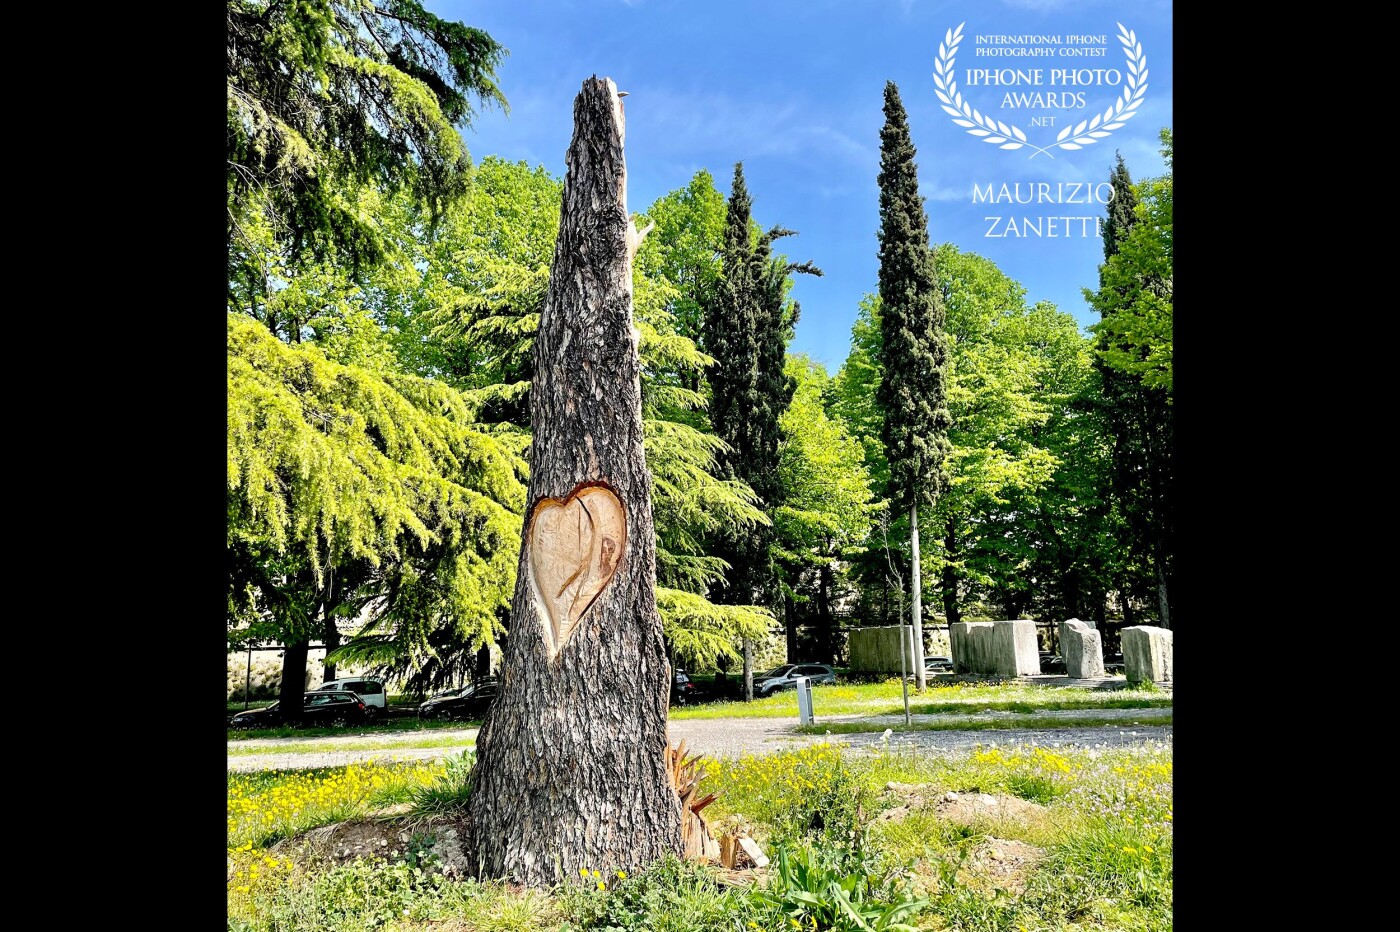 In August 2020 in Verona, a monstrous storm knocked down hundreds of secular trees as if they were ebon threads. On what remains of one of these someone has engraved a heart. For once it is not the action of the usual hooligan but an act of love. And the hope is that what remains of the tree won't be cut down. The photo was taken with iPhone 12 Pro.